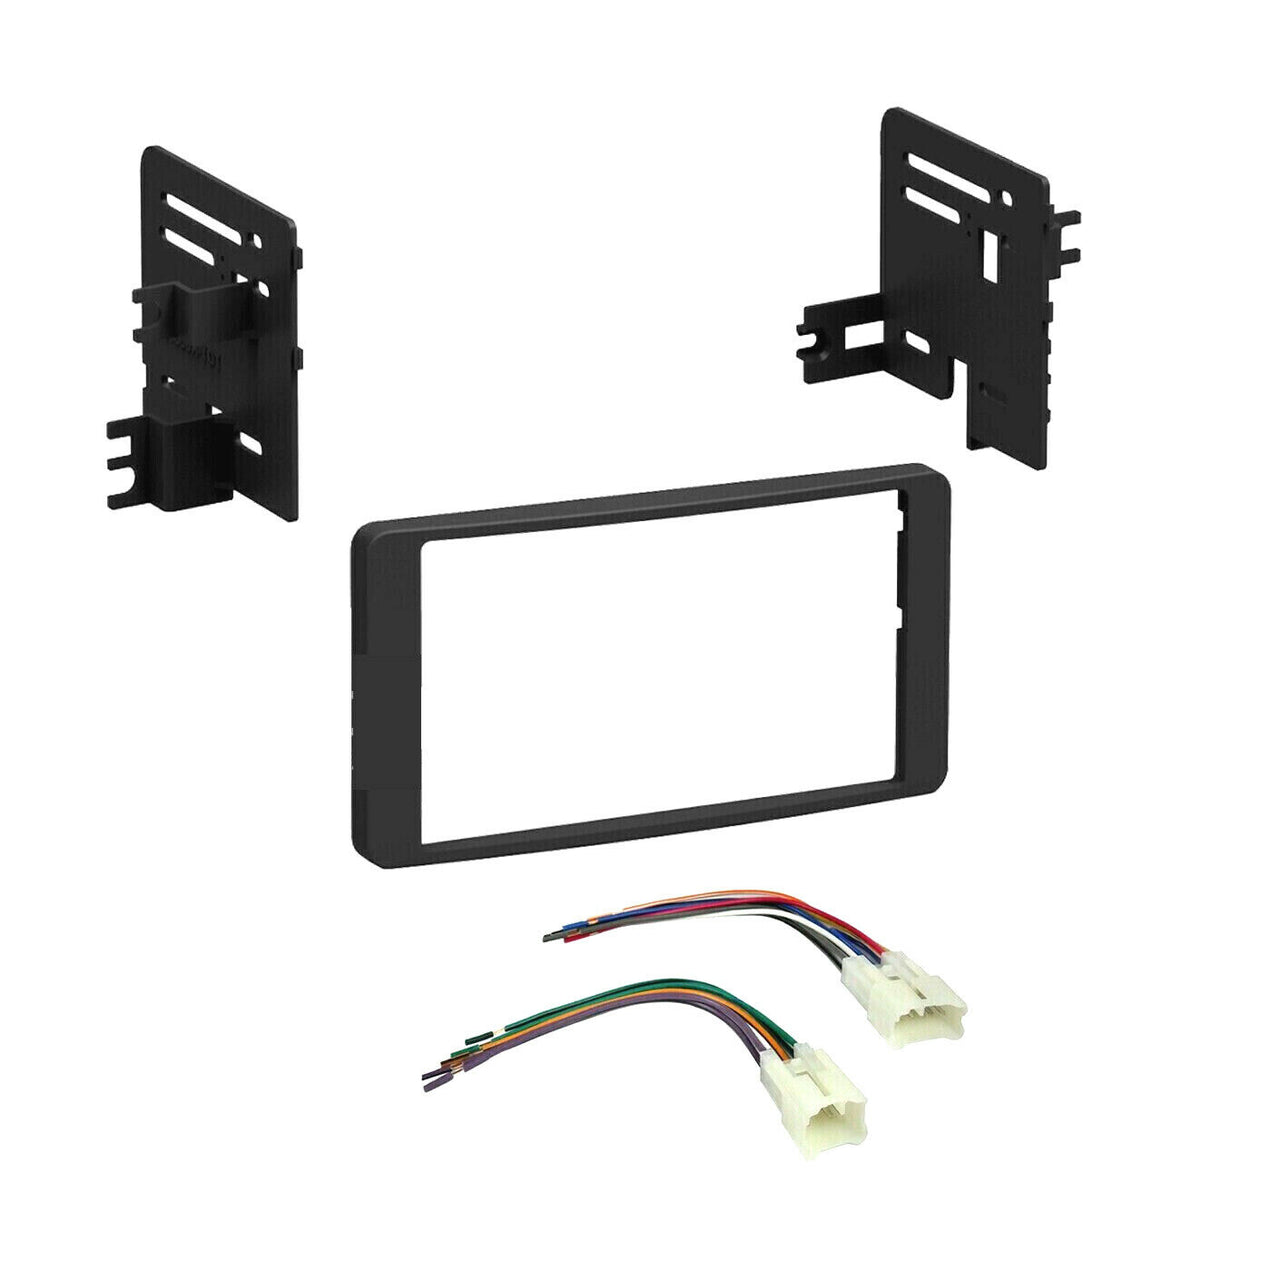 Patron Car Radio Stereo Double Din Dash Kit & Harness for 2003-2007 Toyota Tundra Sequoia